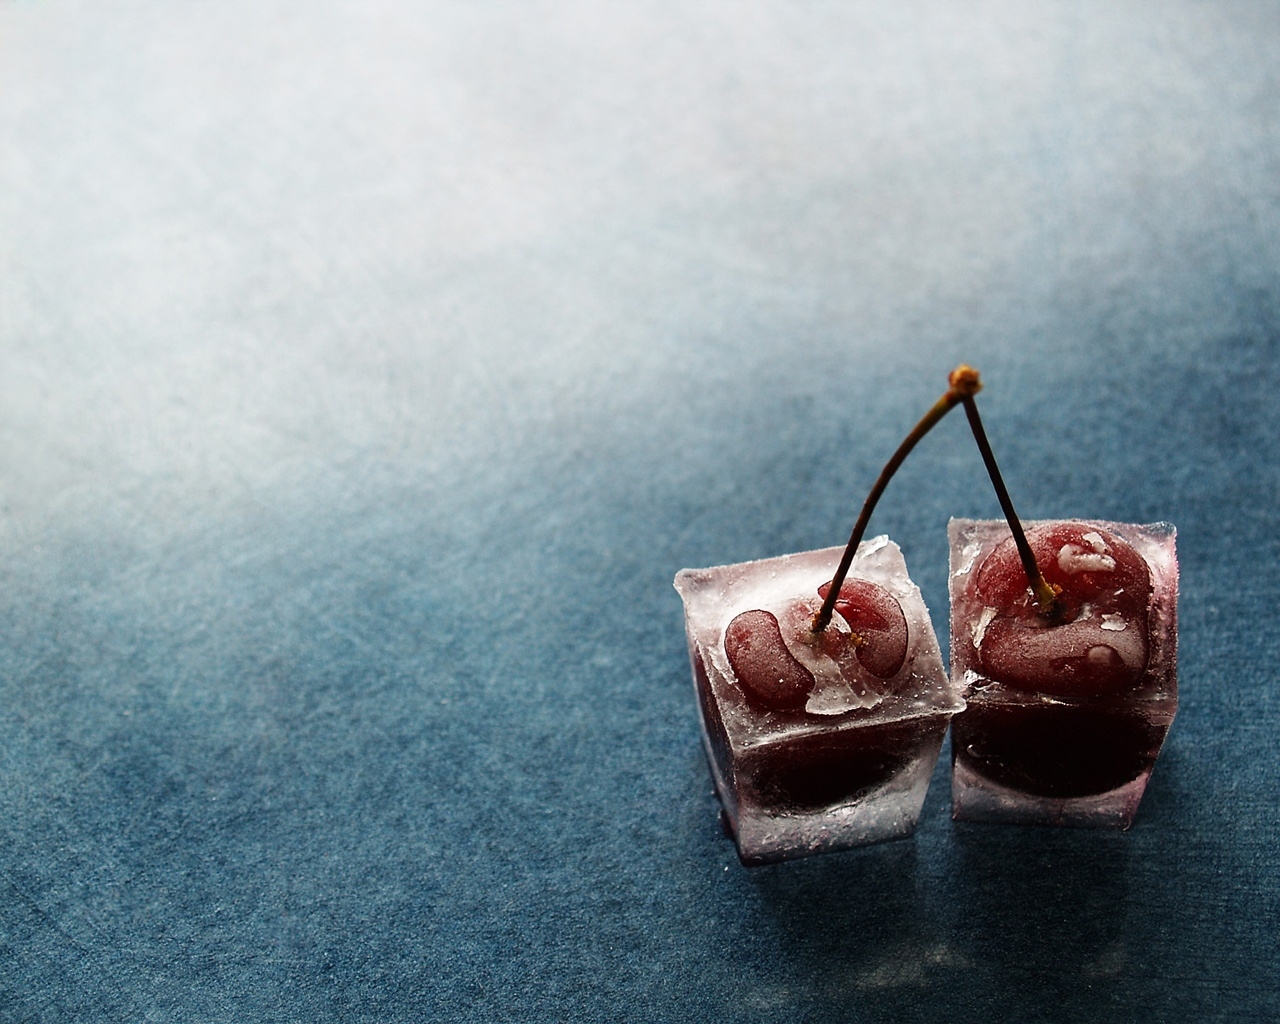 Cherries in Ice for 1280 x 1024 resolution